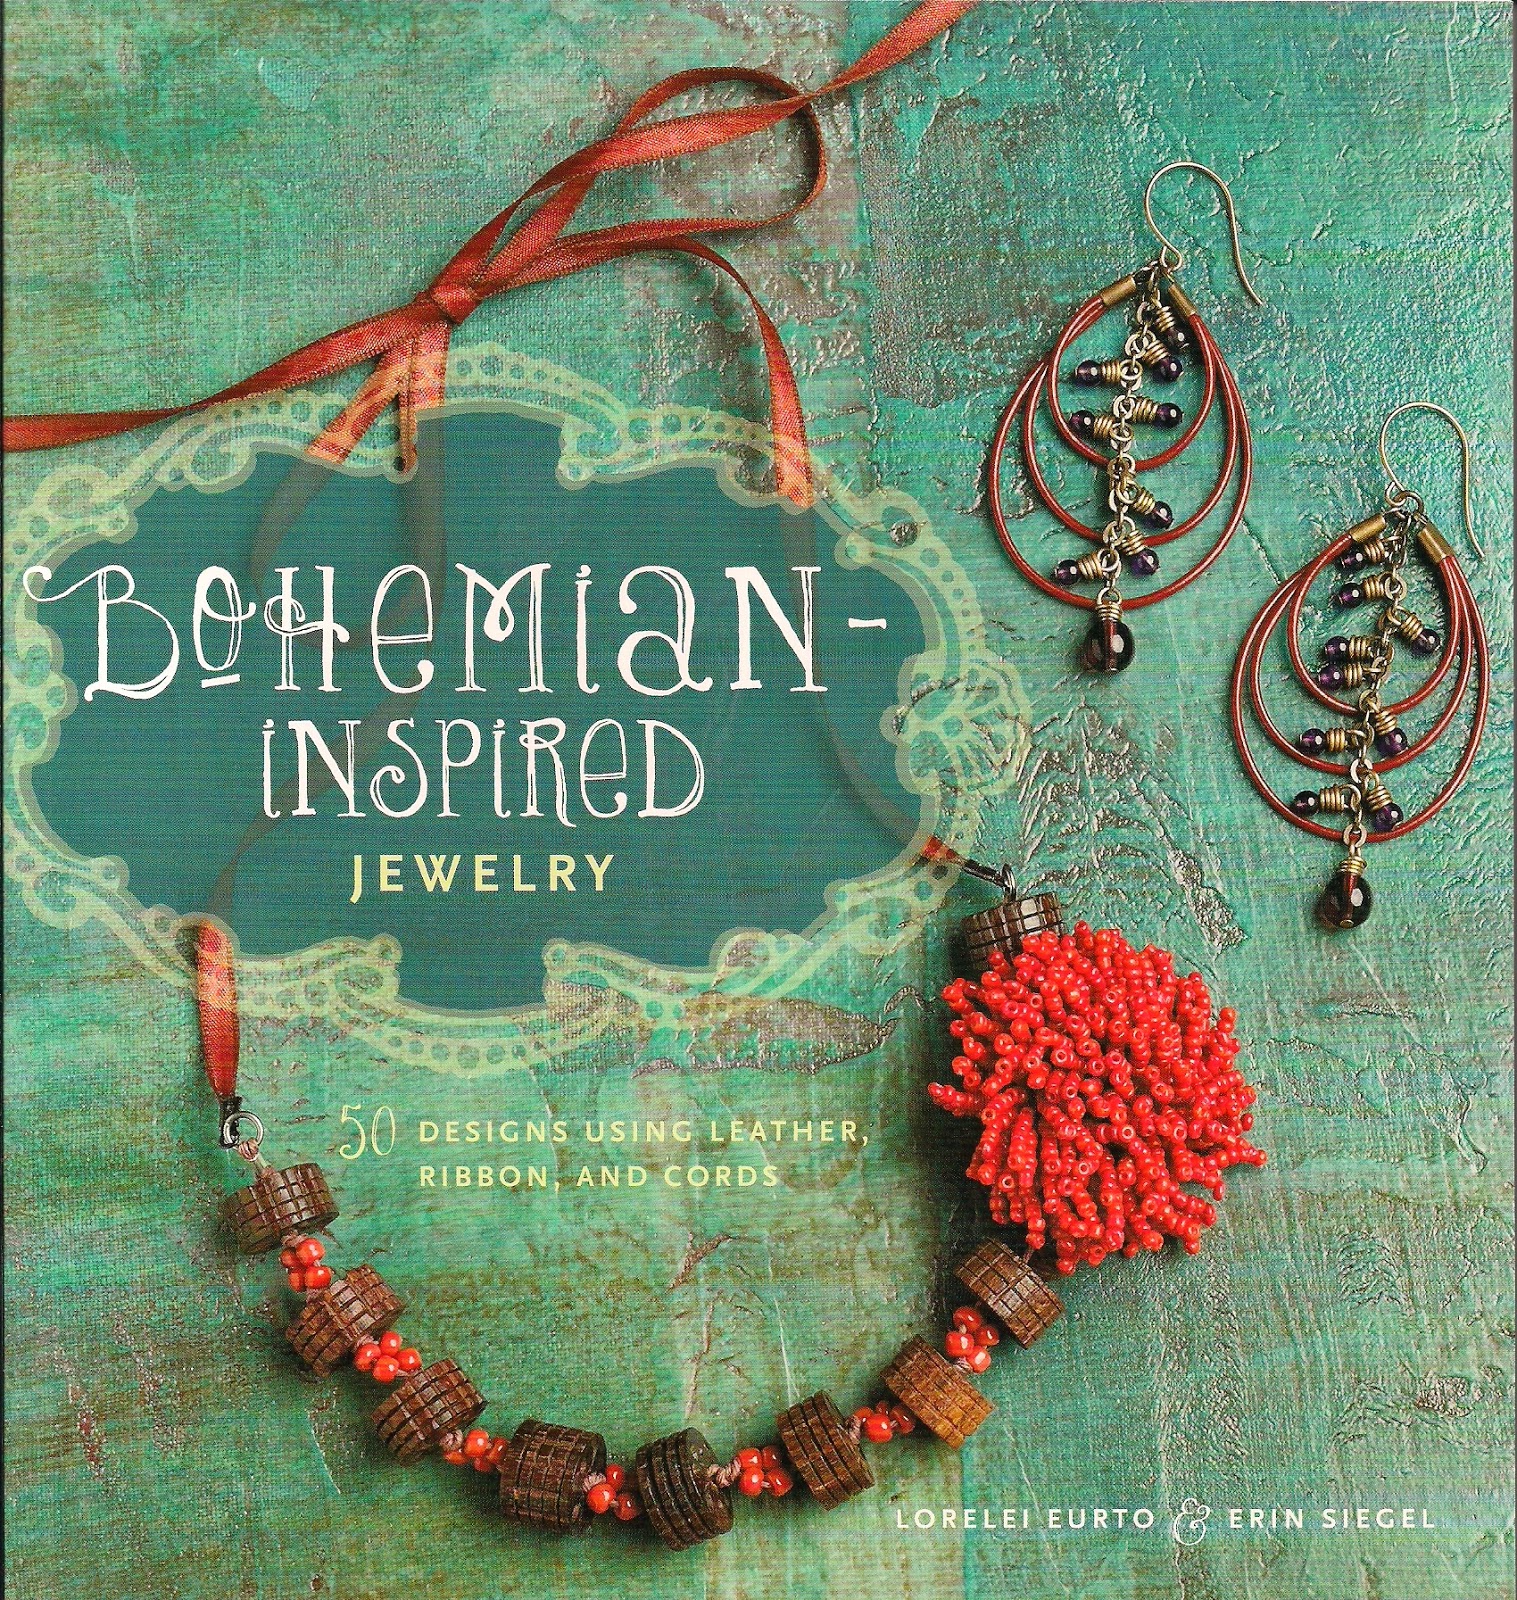 http://www.amazon.com/Bohemian-Inspired-Jewelry-Designs-Leather-Ribbon/dp/1596684984